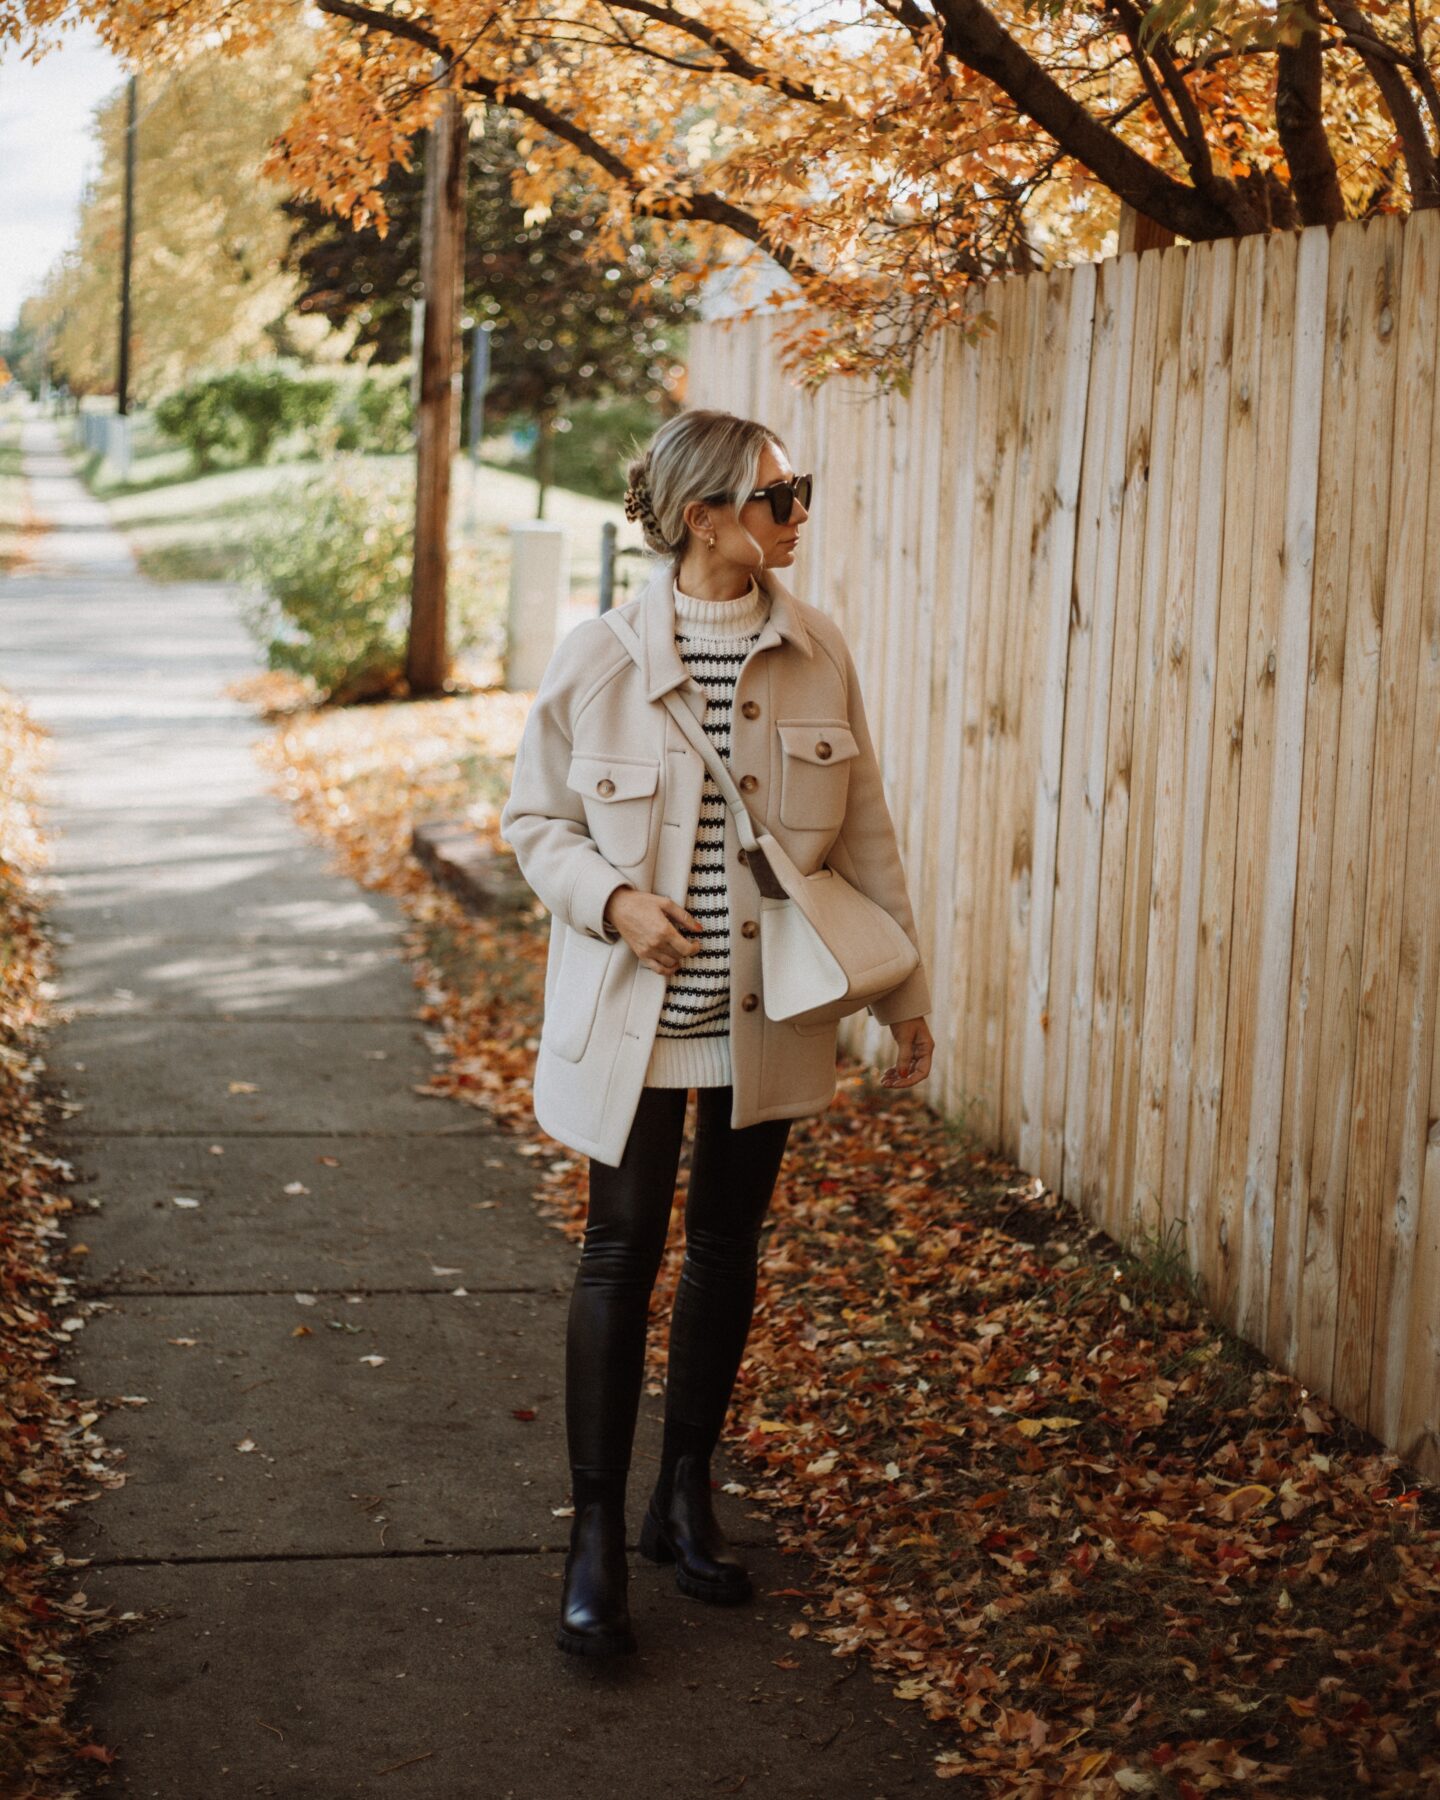 Karin Emily wears a striped sweater tunic under a neutral shacket and leather leggings with black lug boots